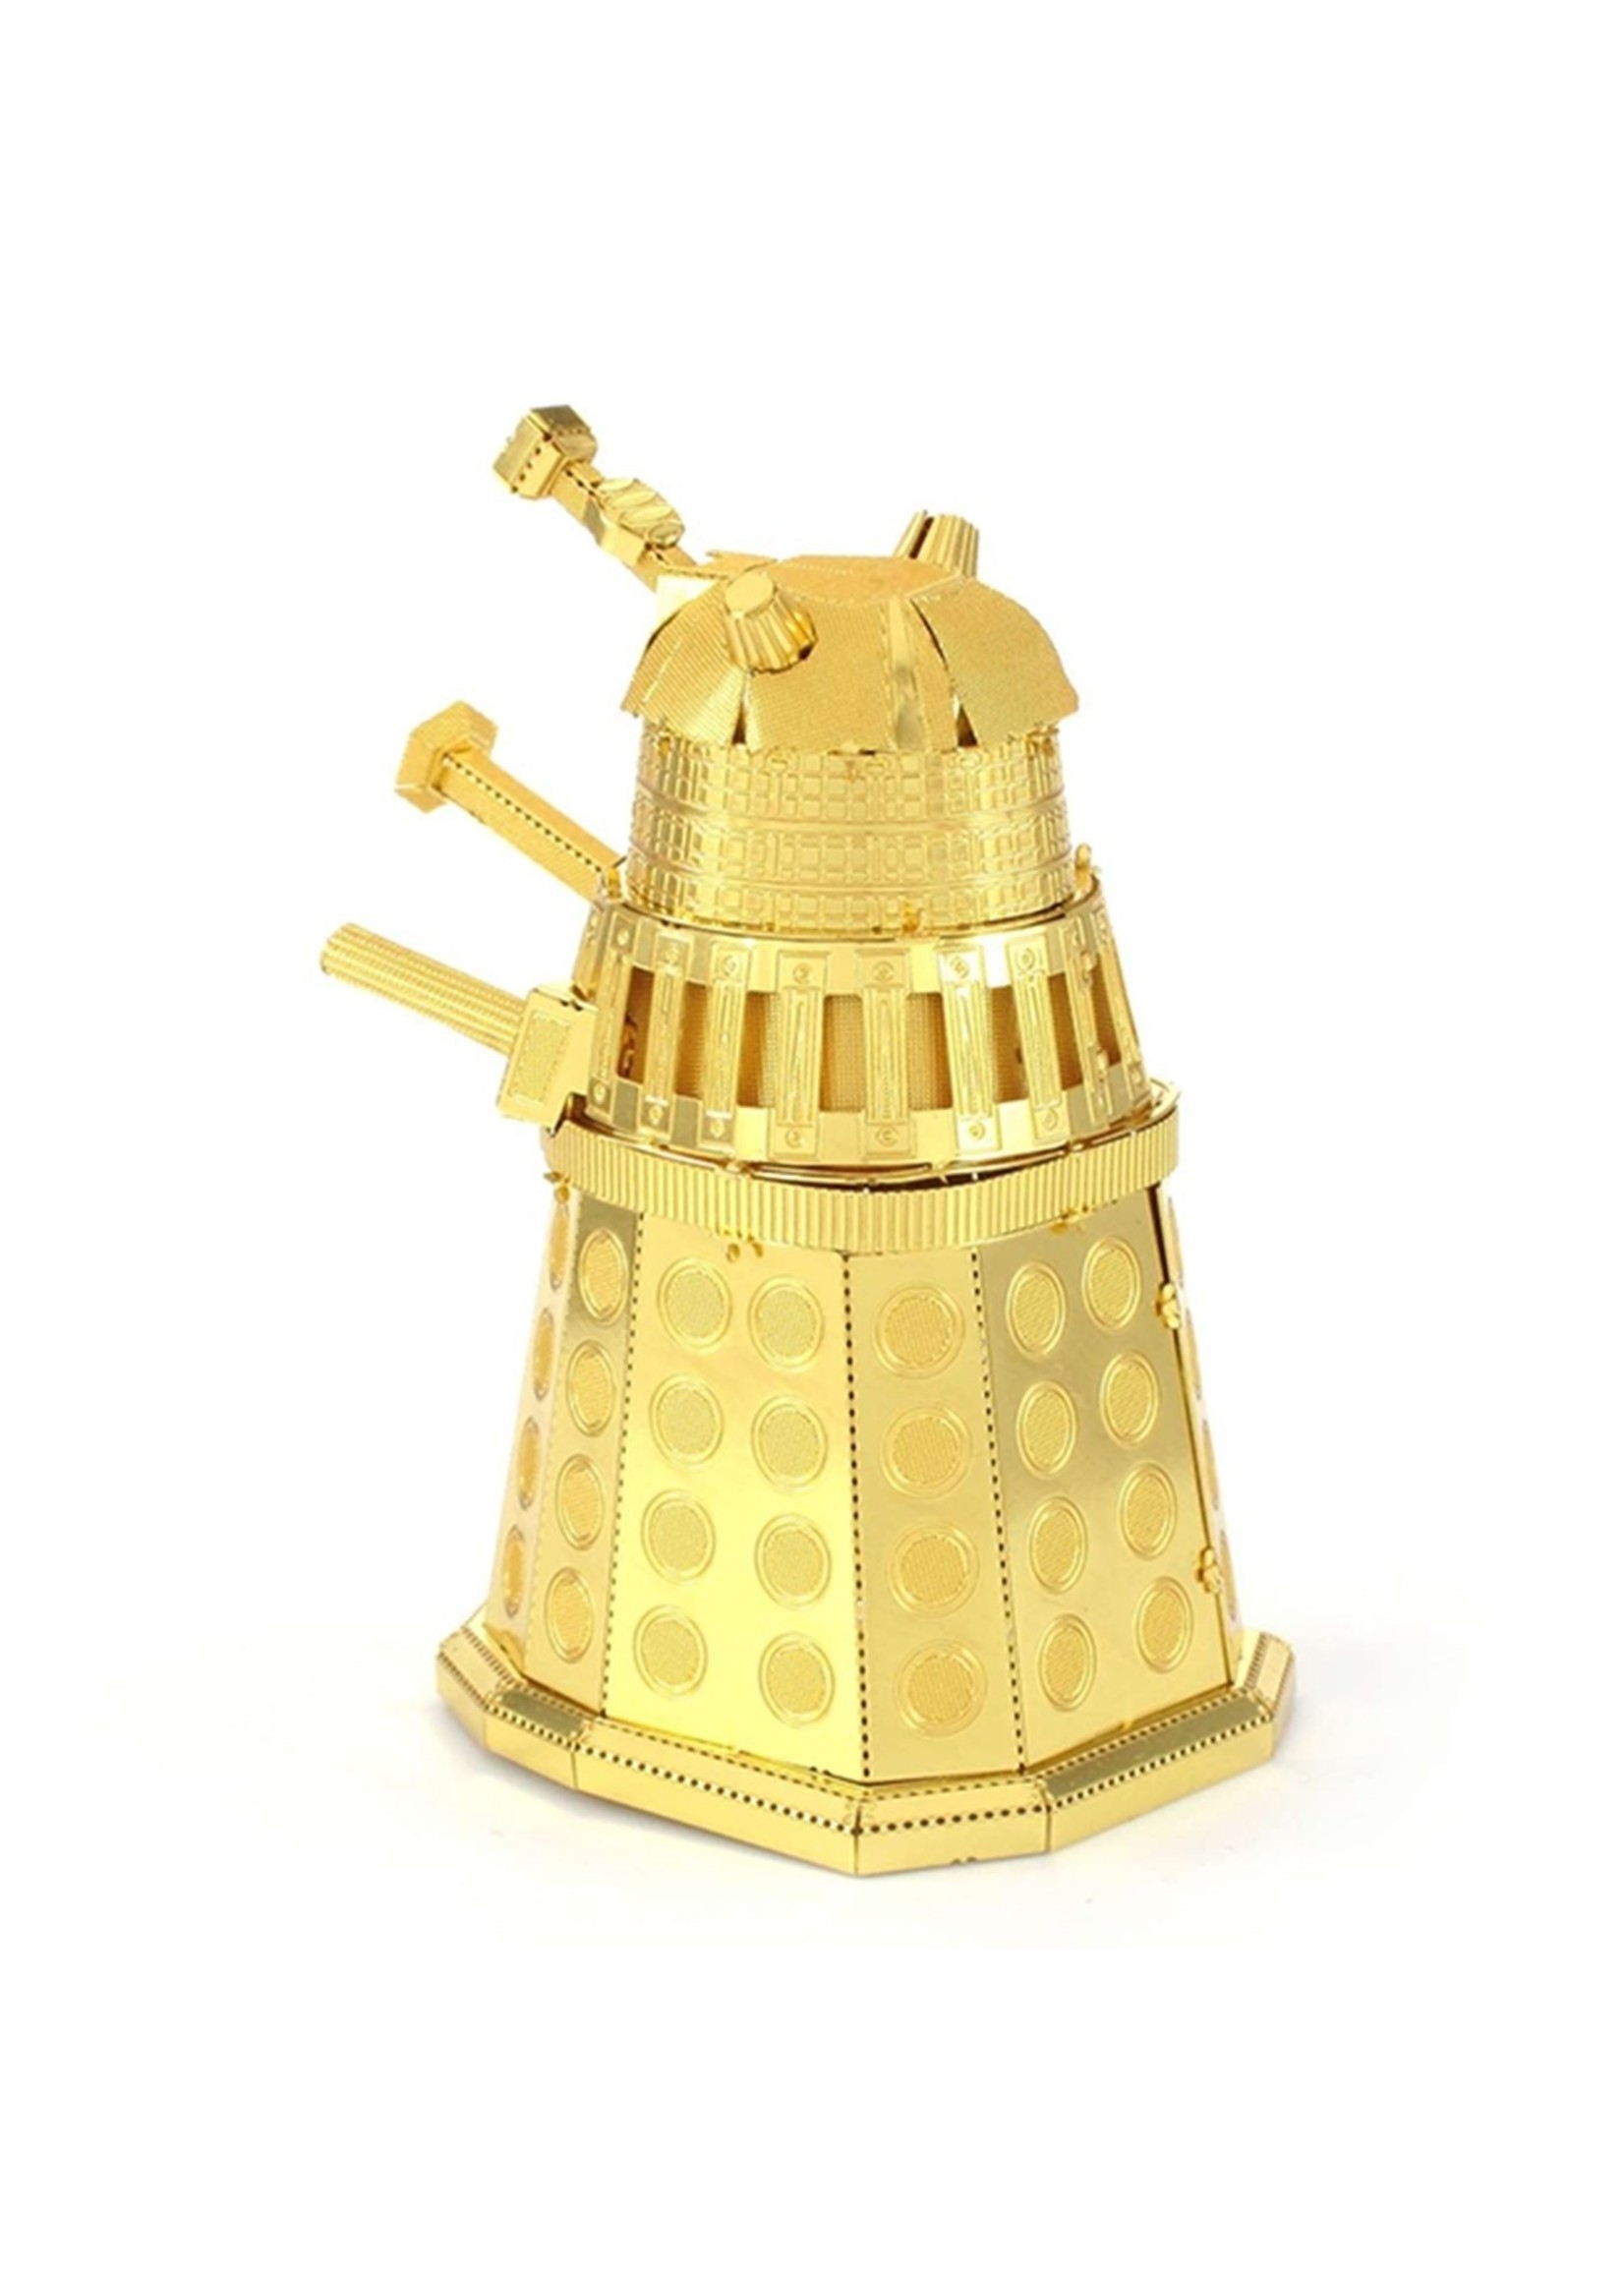 Fascinations Metal Earth - Dr. Who Gold Dalek